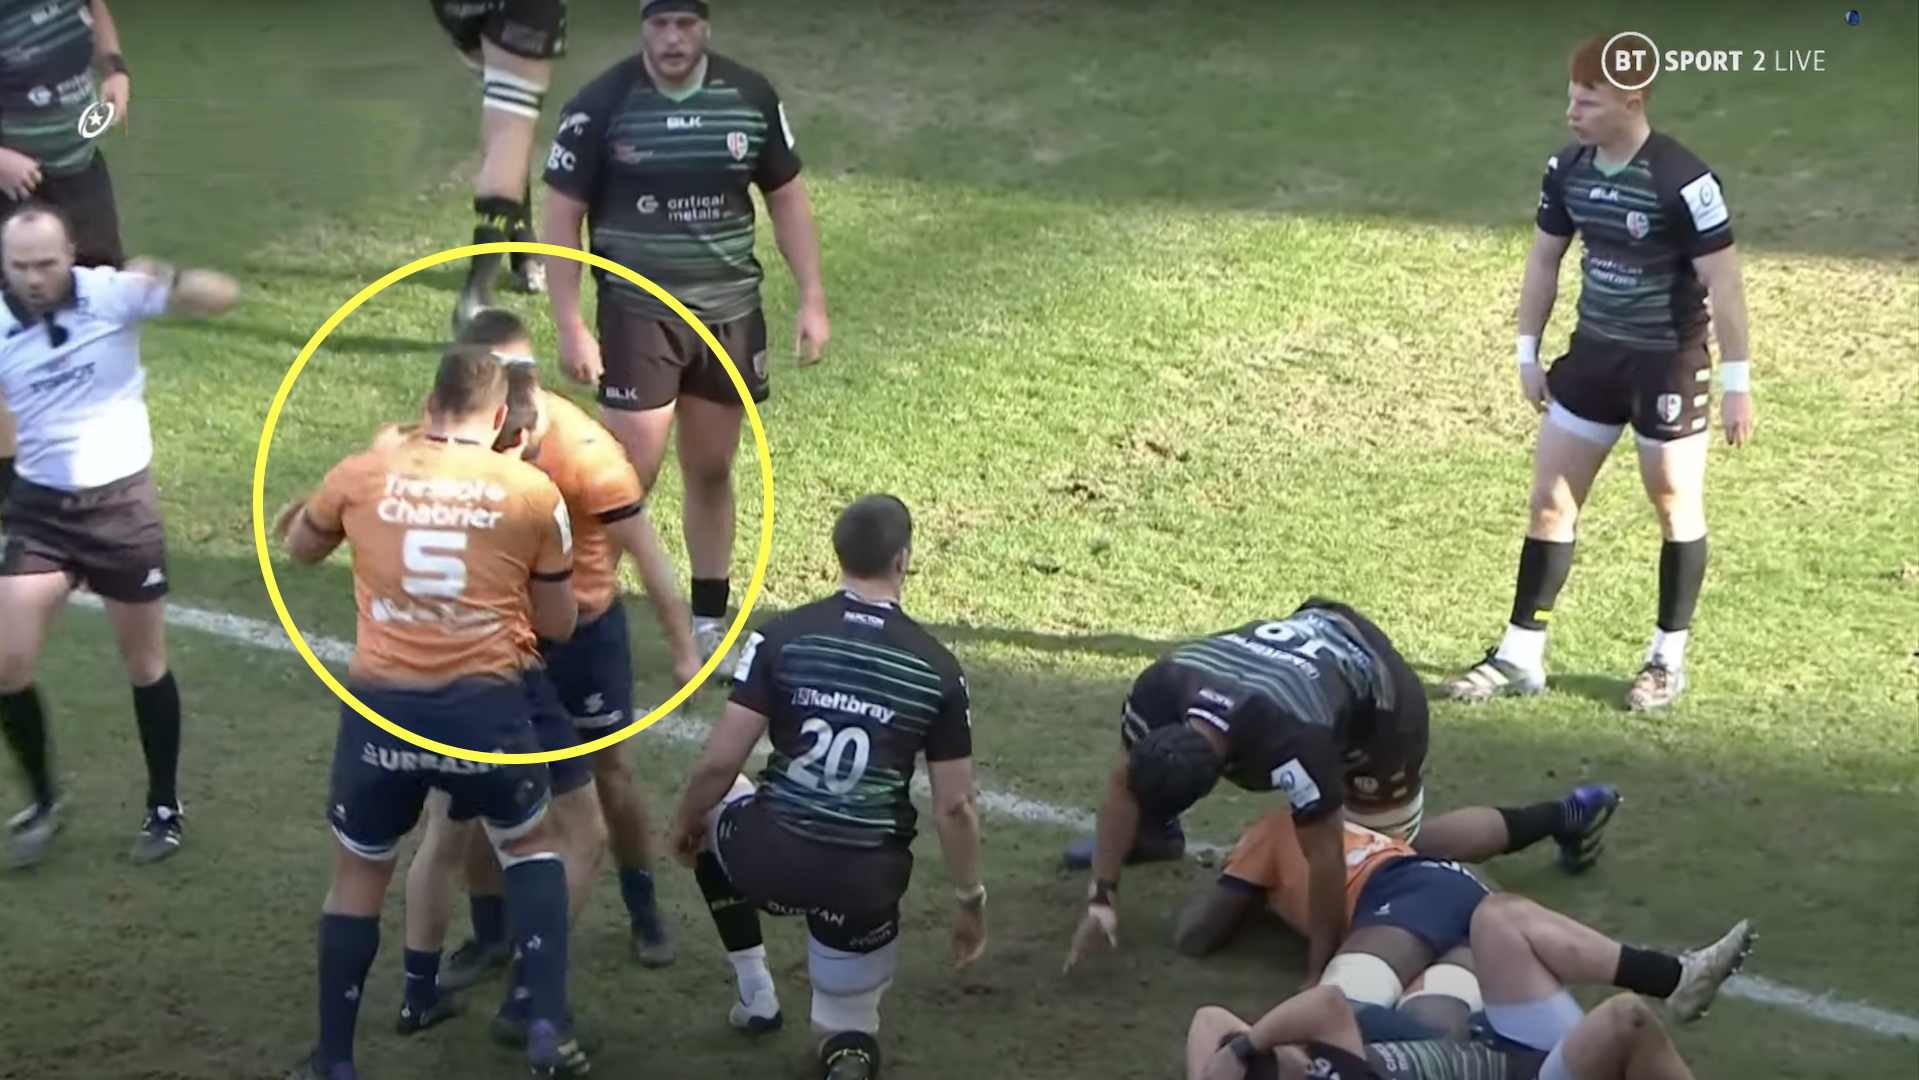 Enraged Bok launches into opposite man after scoring try